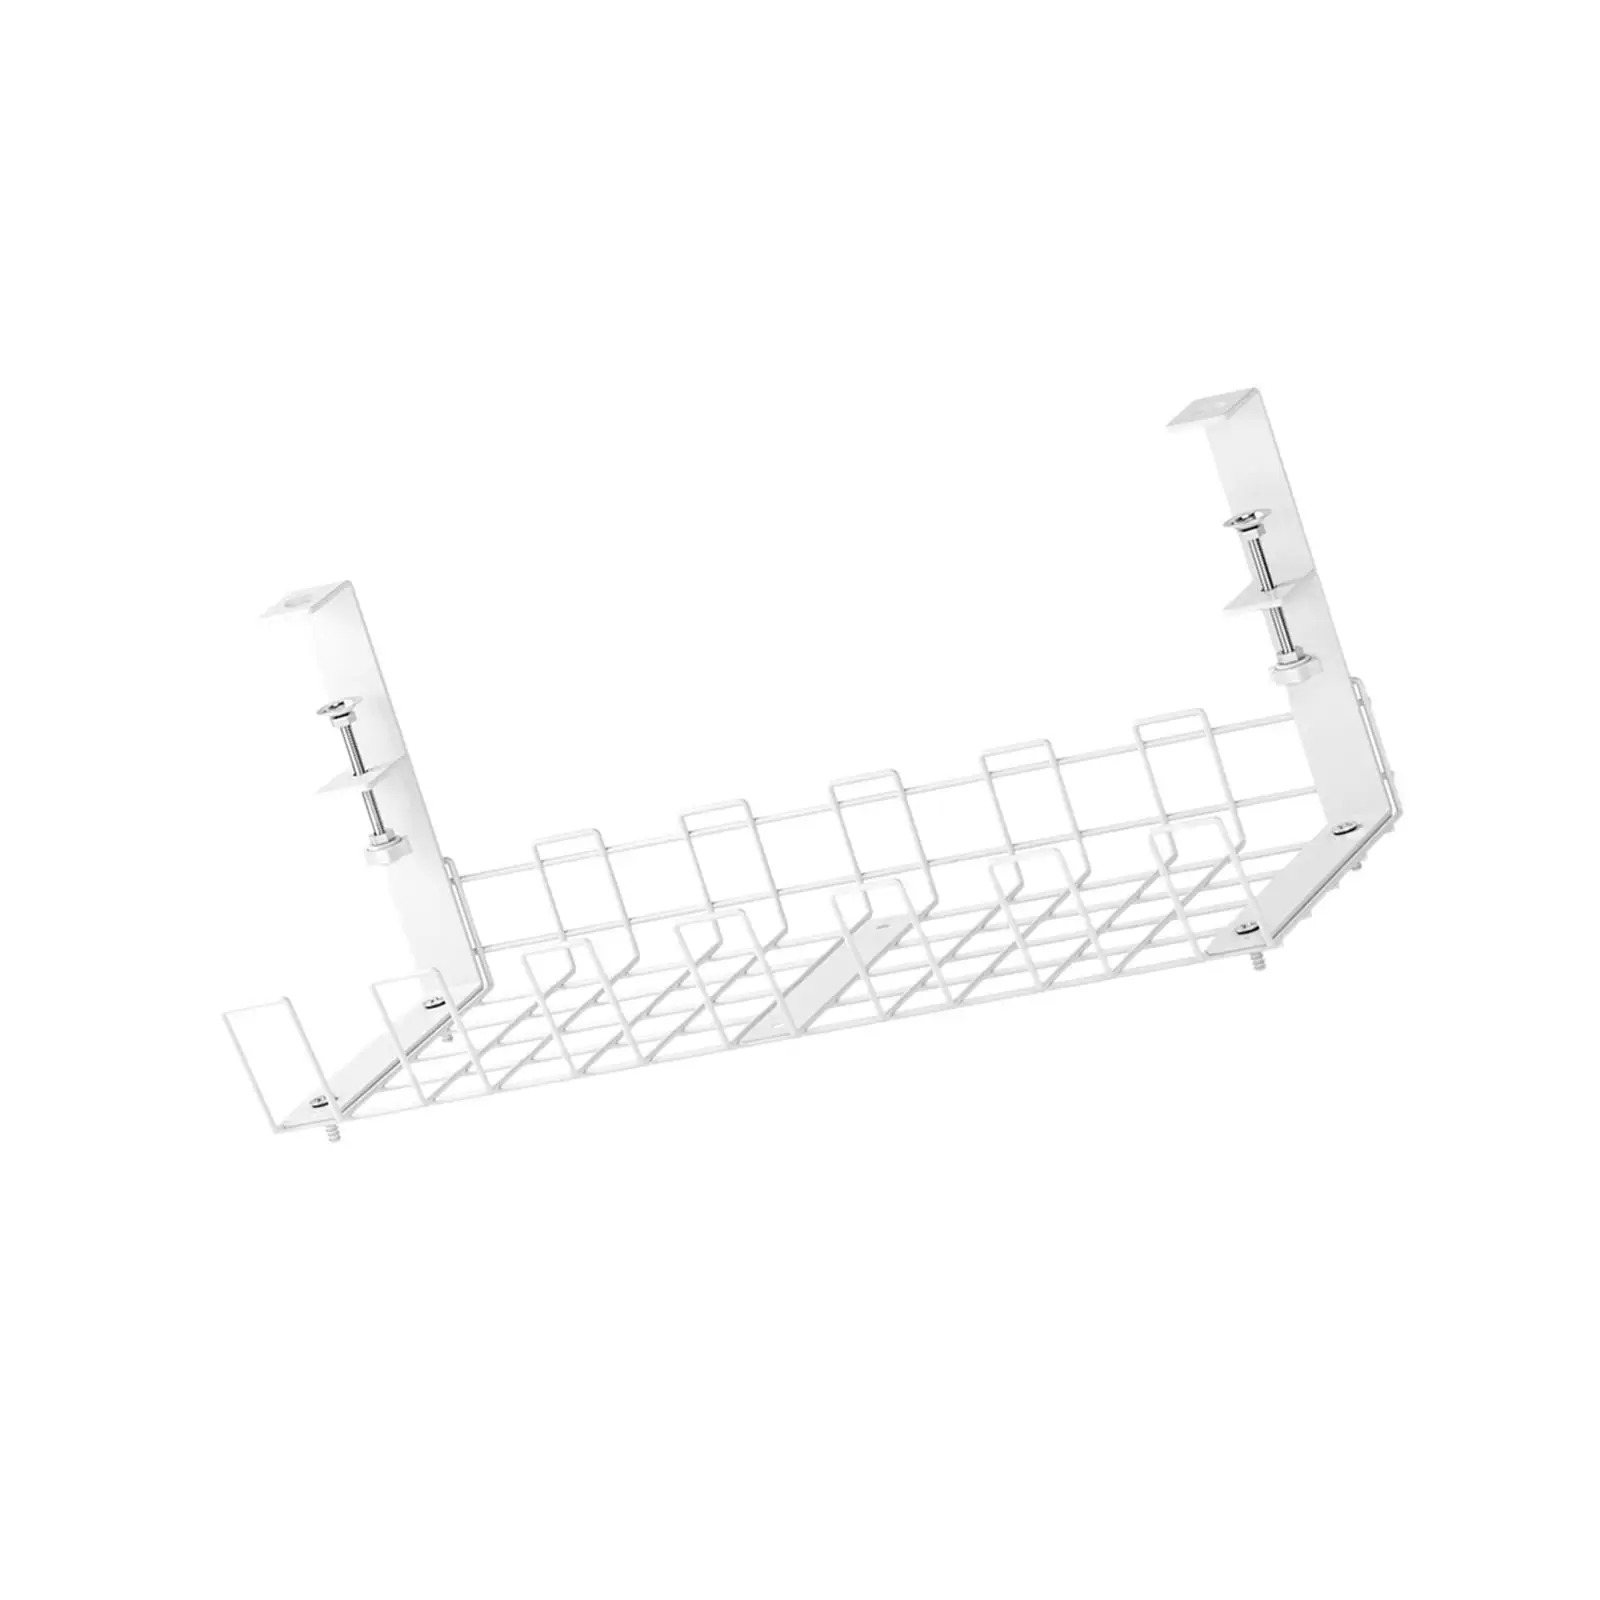 Cable Organizer Super Sturdy Container Durable Rack Storage for Home Office